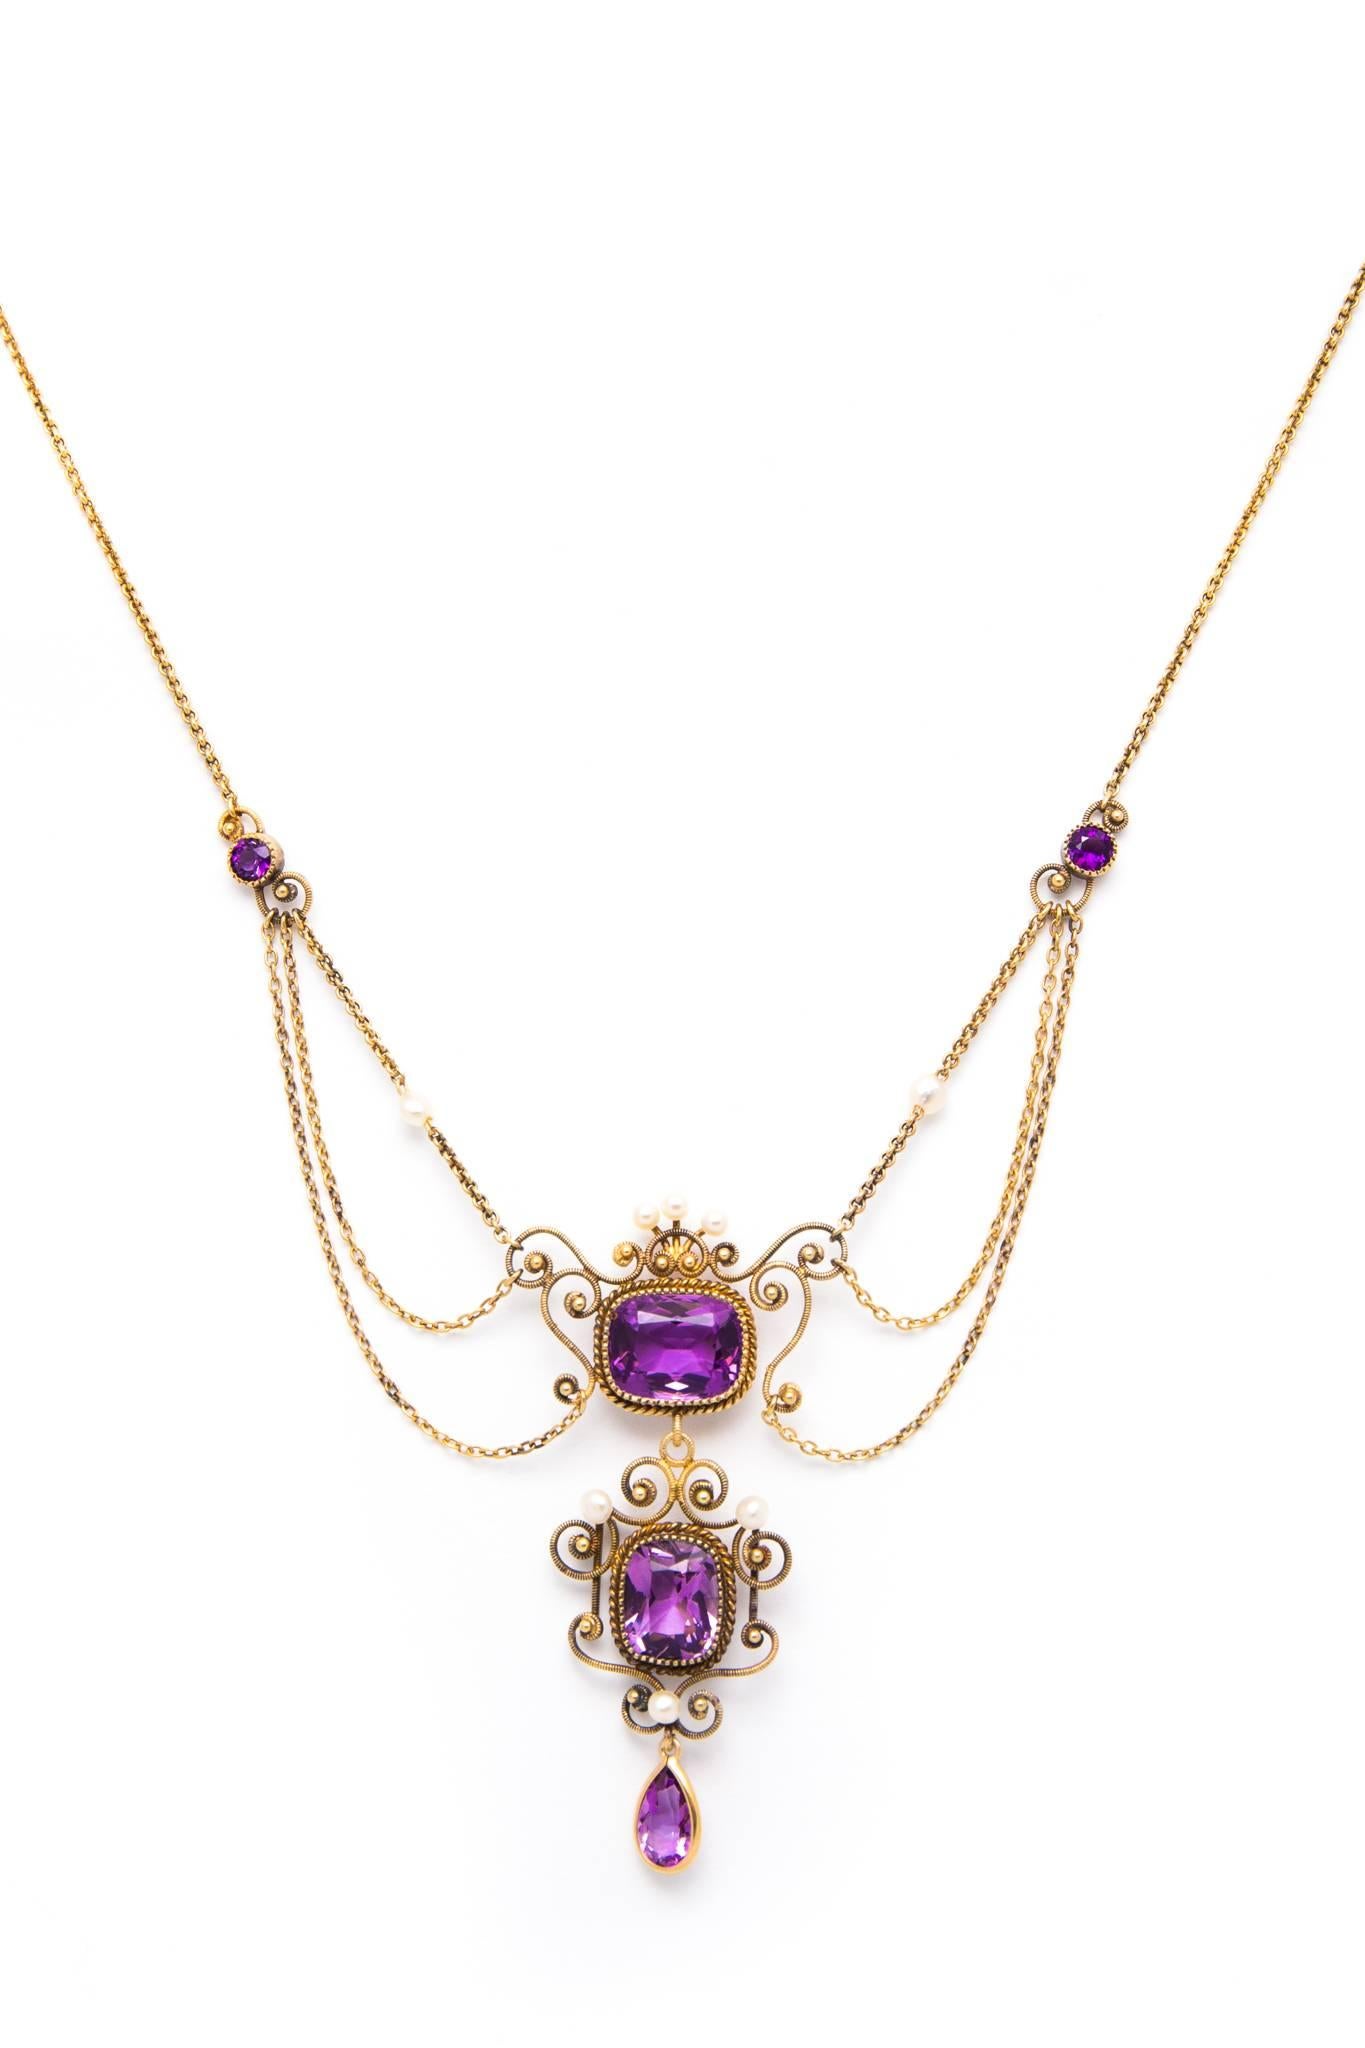 An original edwardian period amethyst and pearl festoon style necklace in 14 karat yellow gold.  Boasting a trio of rich vividly colored amethyst this necklace is set throughout with glistening top quality pearls.

Weighing approximately fourteen